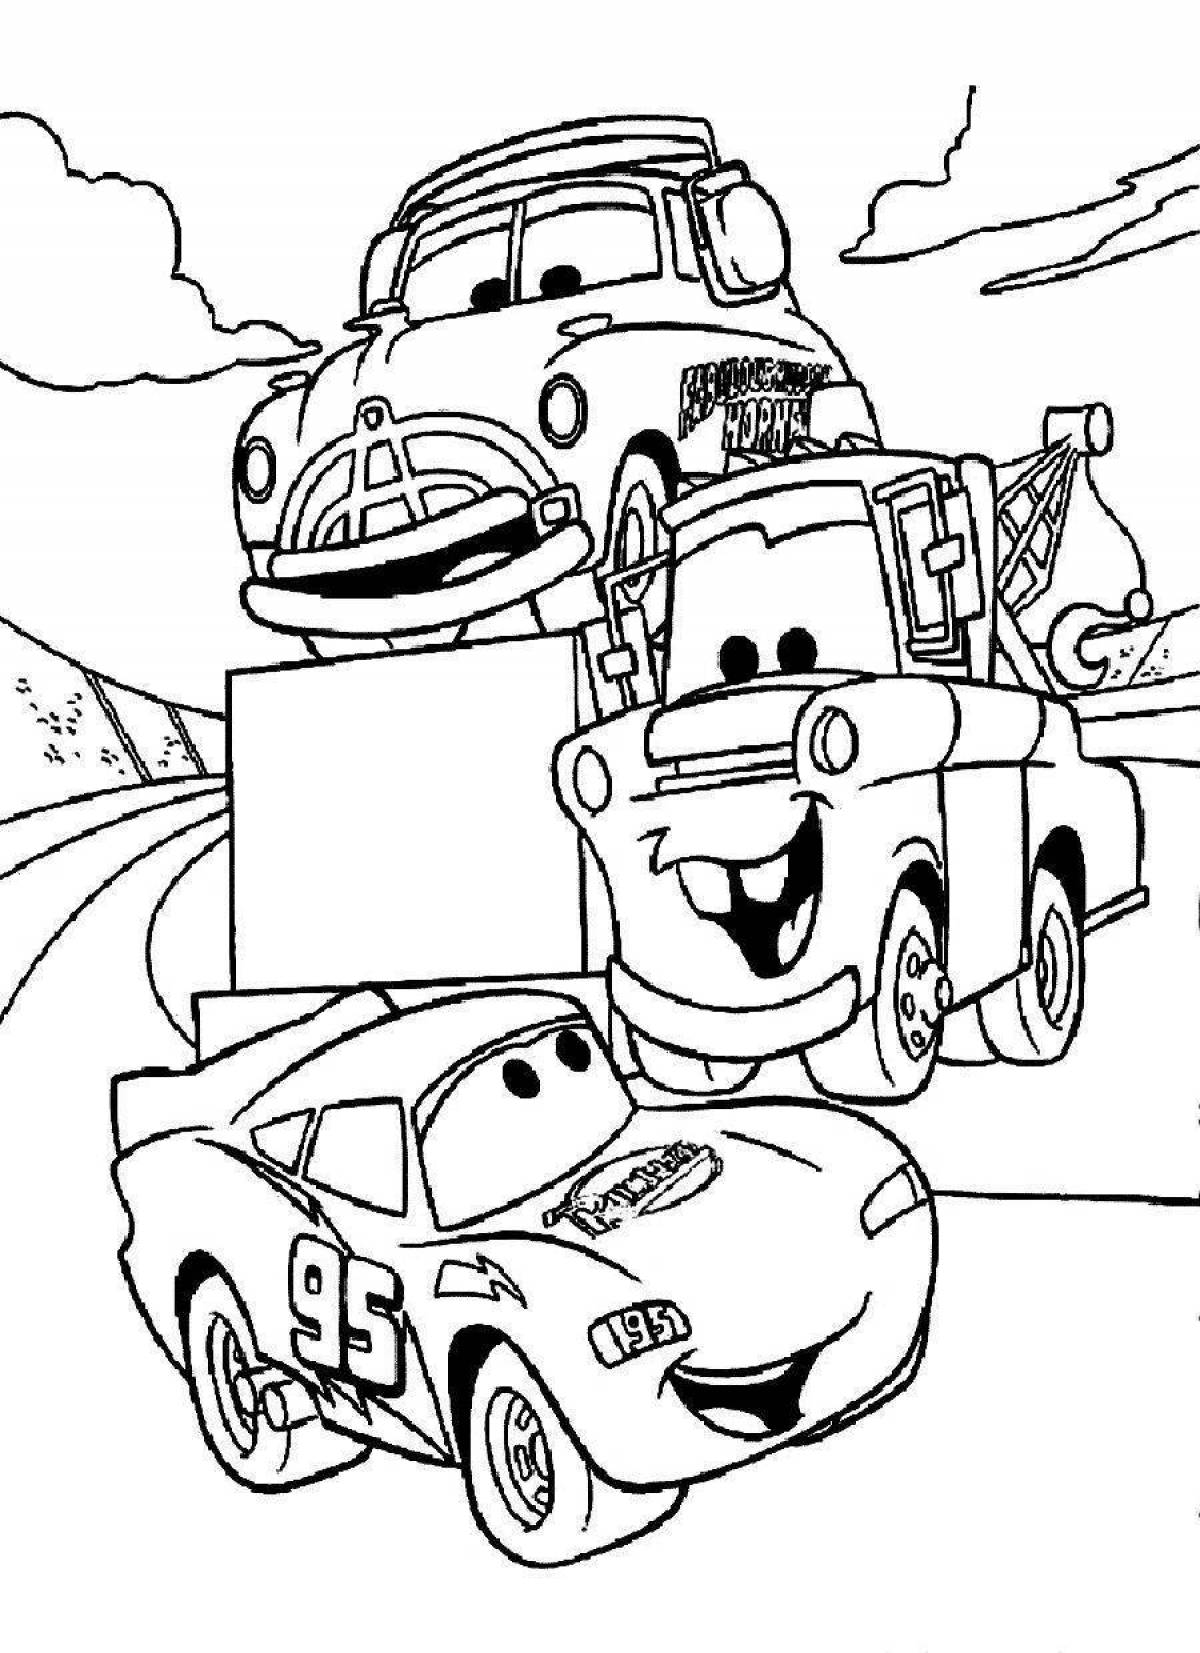 Merry cars makvin coloring pages